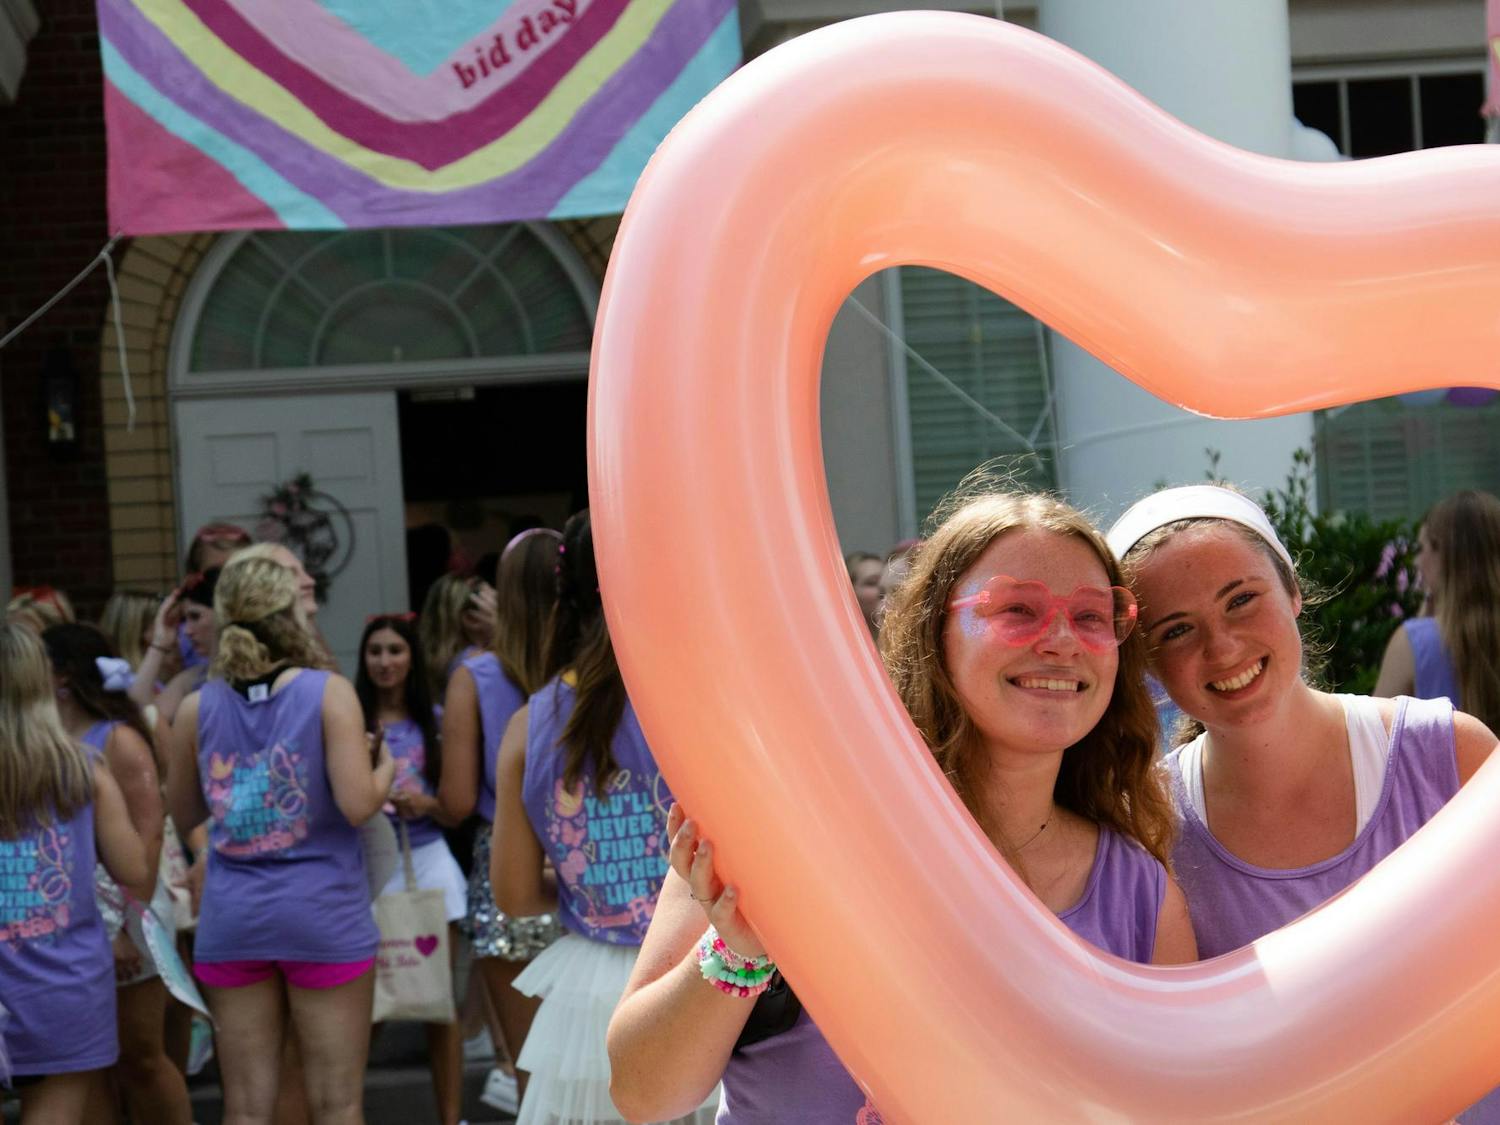 Sisters of the University of South Carolina sororities celebrate Bid Day on Aug. 27, 2023. Bid Day marks the end of a four-stage recruitment process that potential new members complete to join a sorority on campus. More than 2,100 potential new members signed up for recruitment this year, marking the highest number in the history of USC sorority life. Potential new members receive an invitation to a sorority during Bid Day, and all of the sororities celebrate with their new pledge classes.